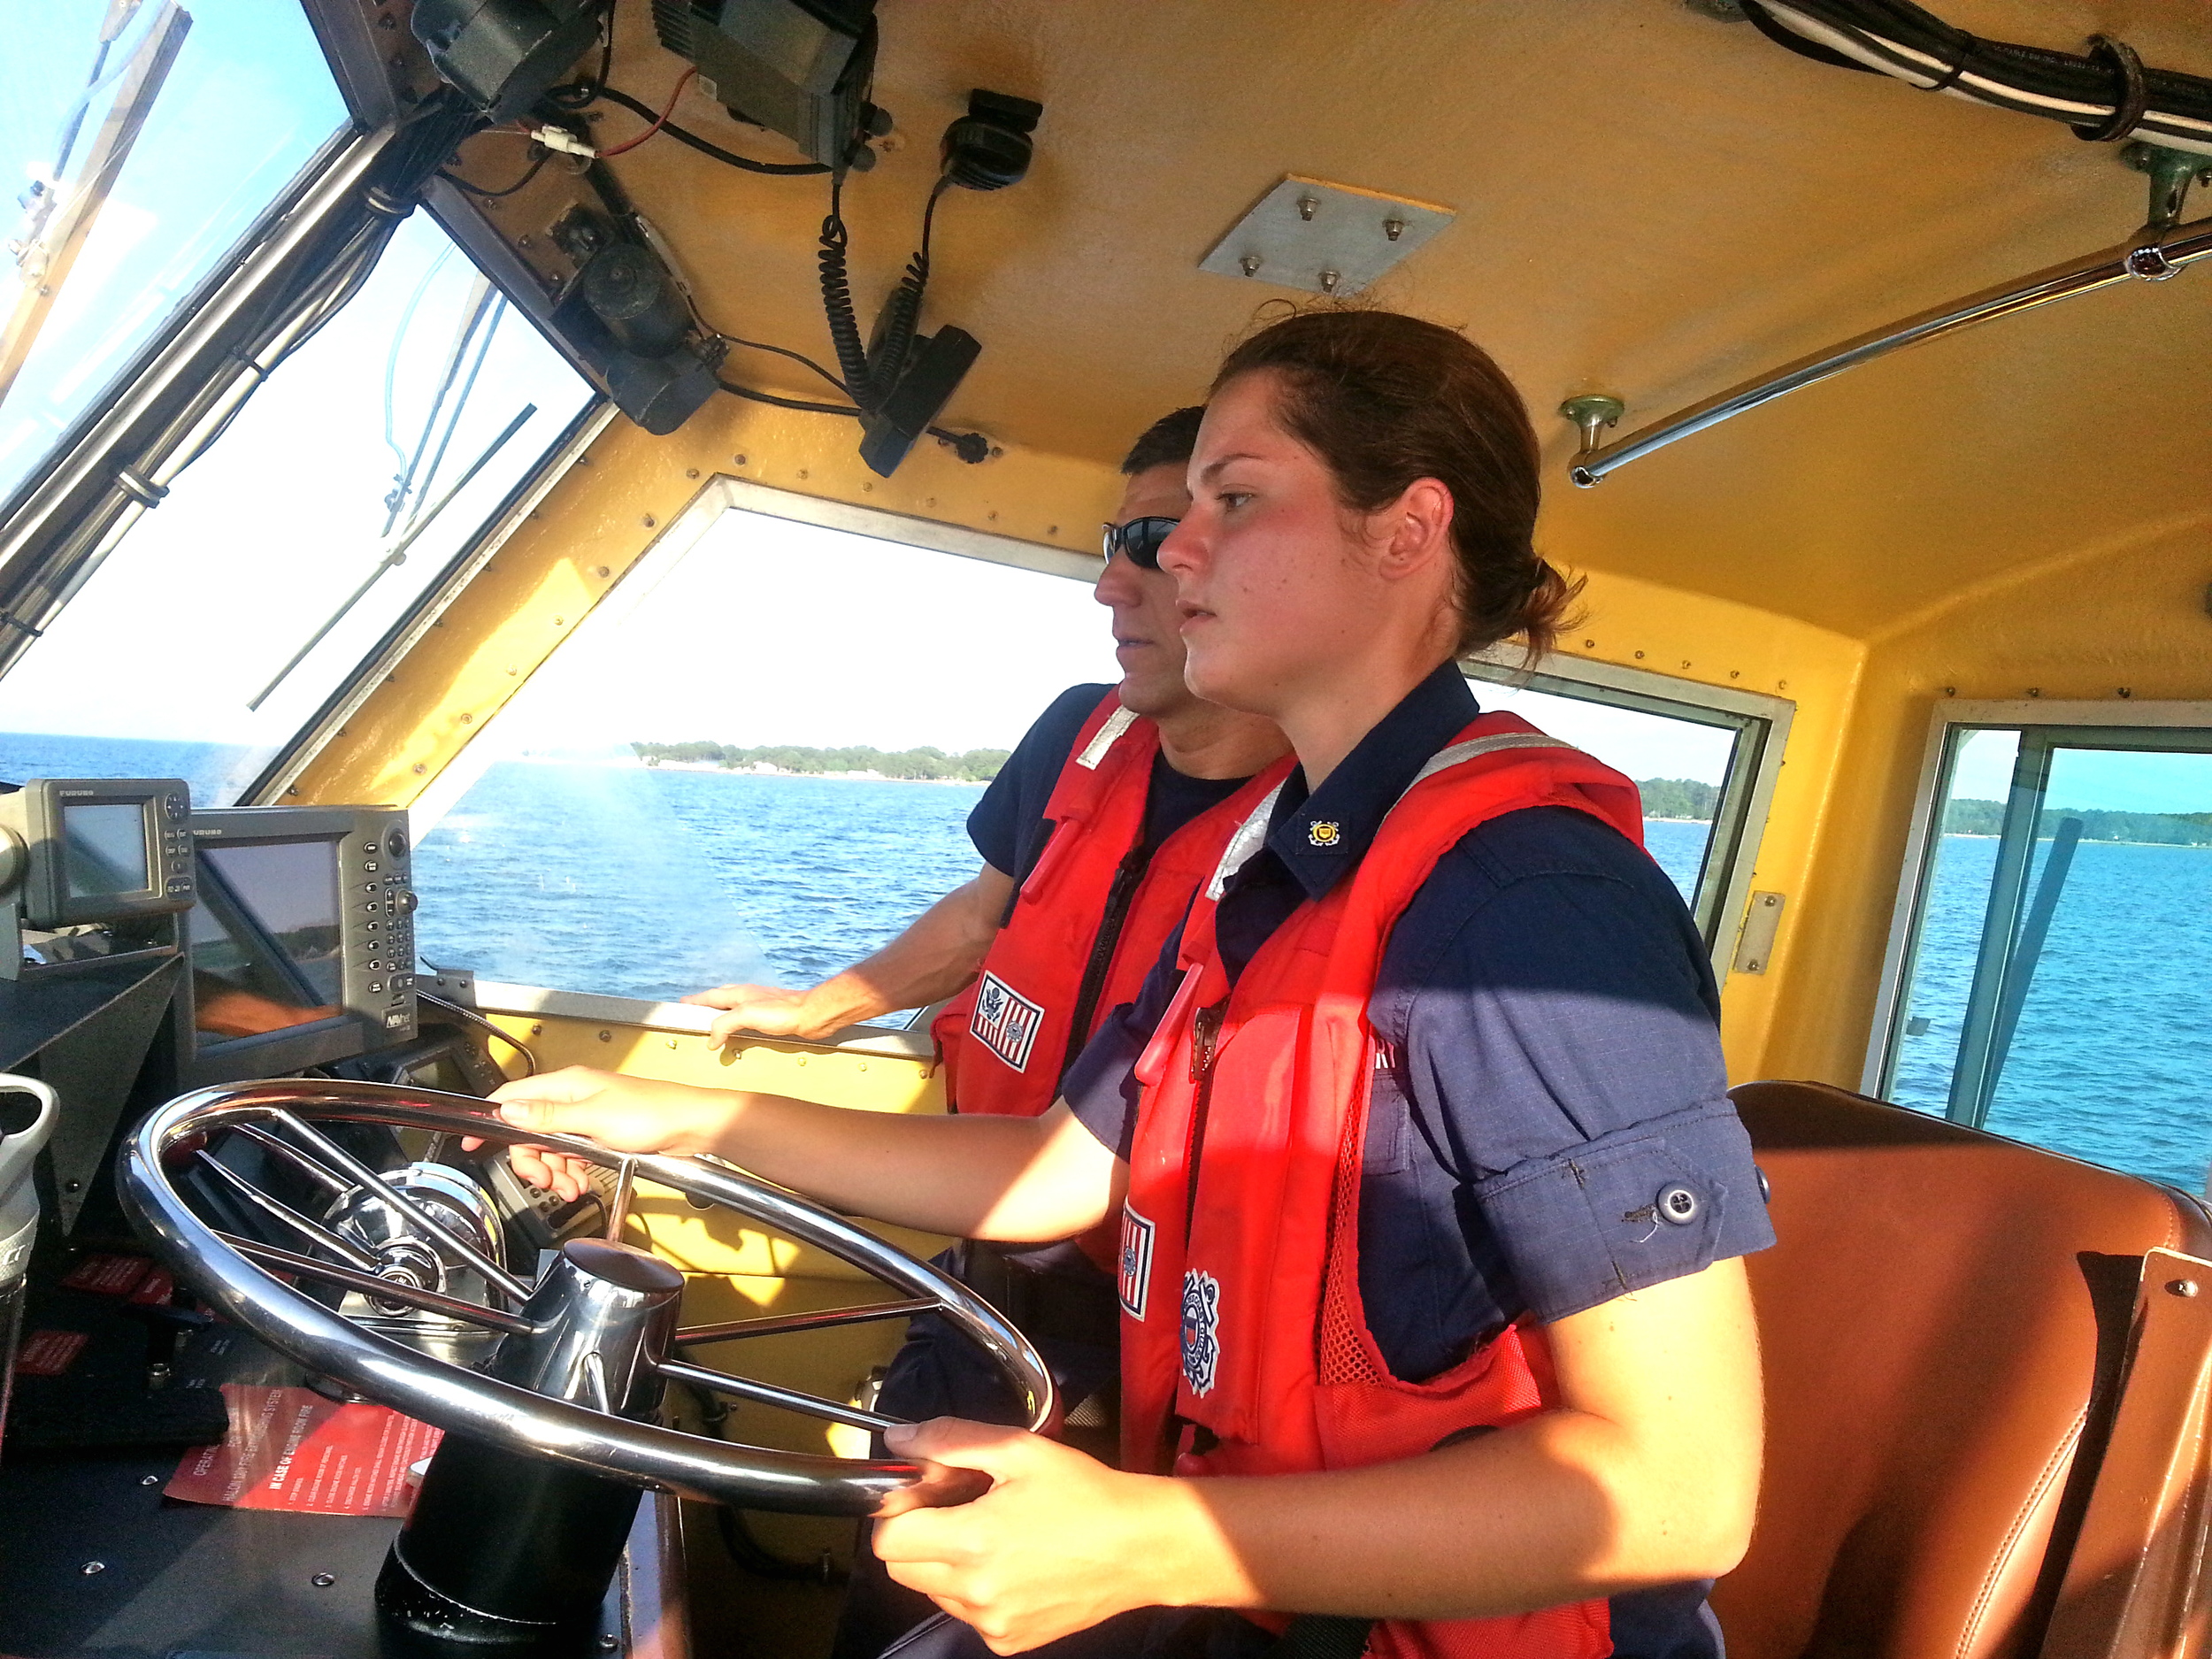  Wingler drives the 41-foot Utility Boat at Coast Guard Station Milford Haven, Va. under the supervision of Chief Petty Officer Dickinson. U.S. Coast Guard photo by auxiliarist Stephanie Hutton. 